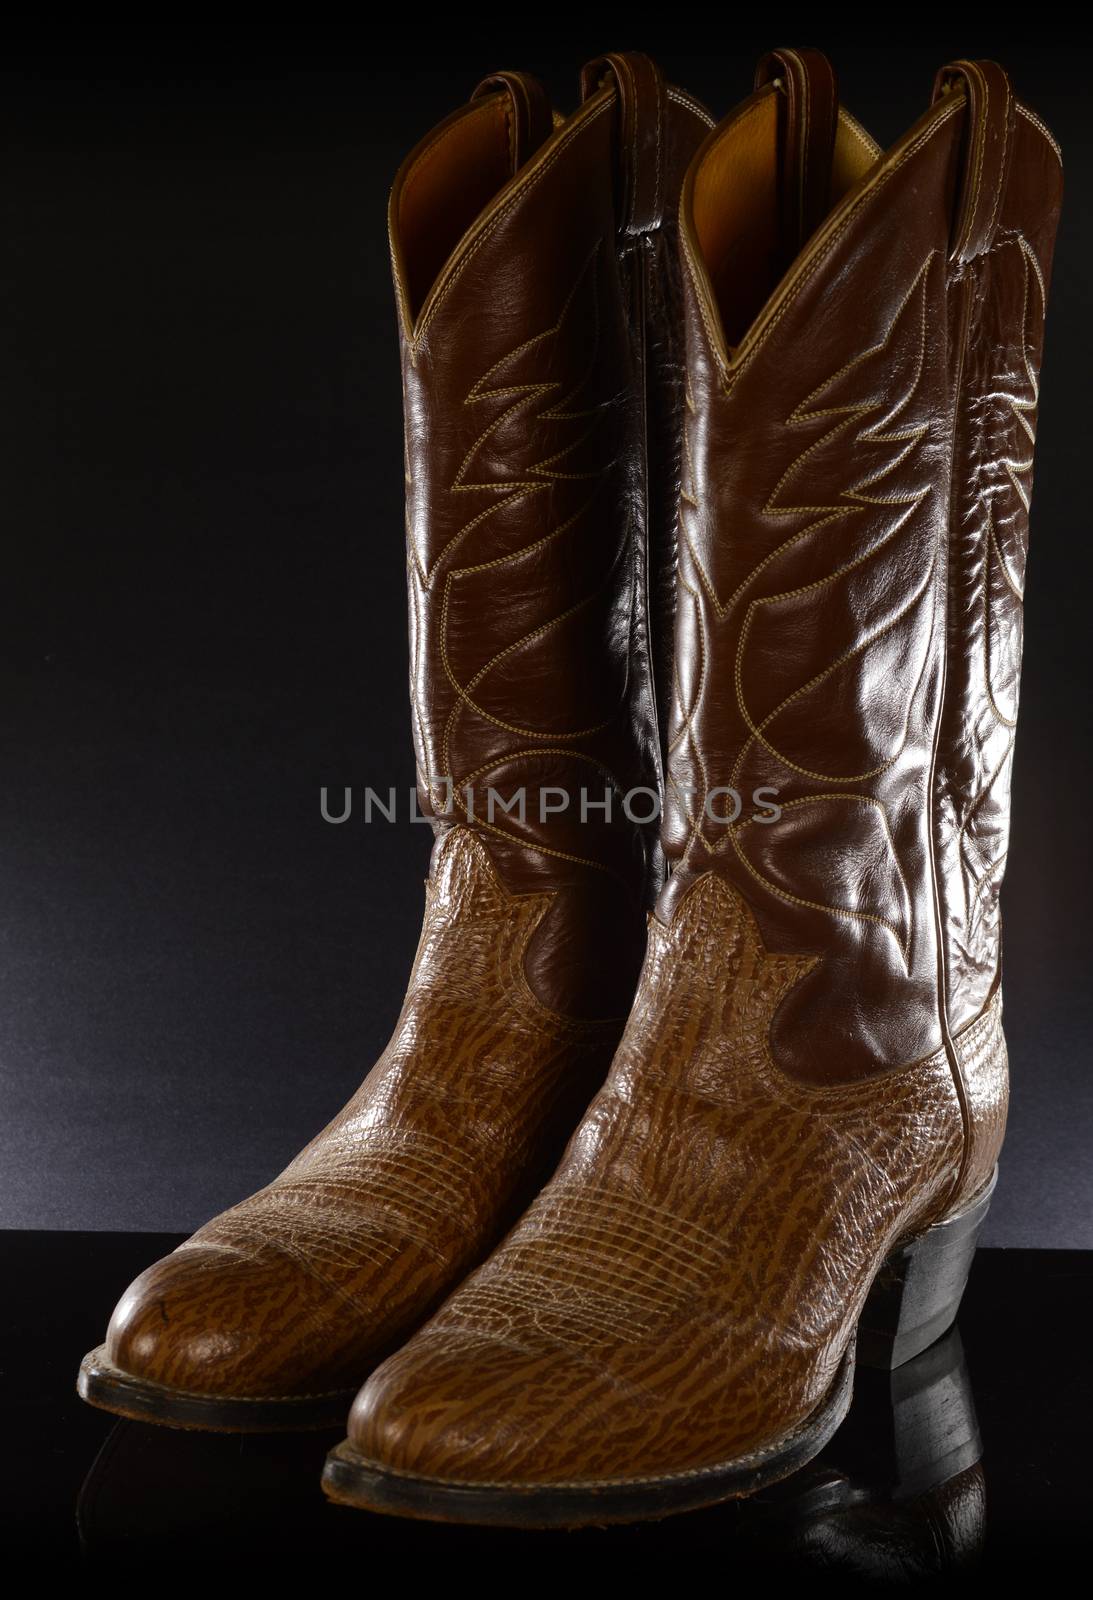 A pair of leather cowboy boots over a black reflective background.